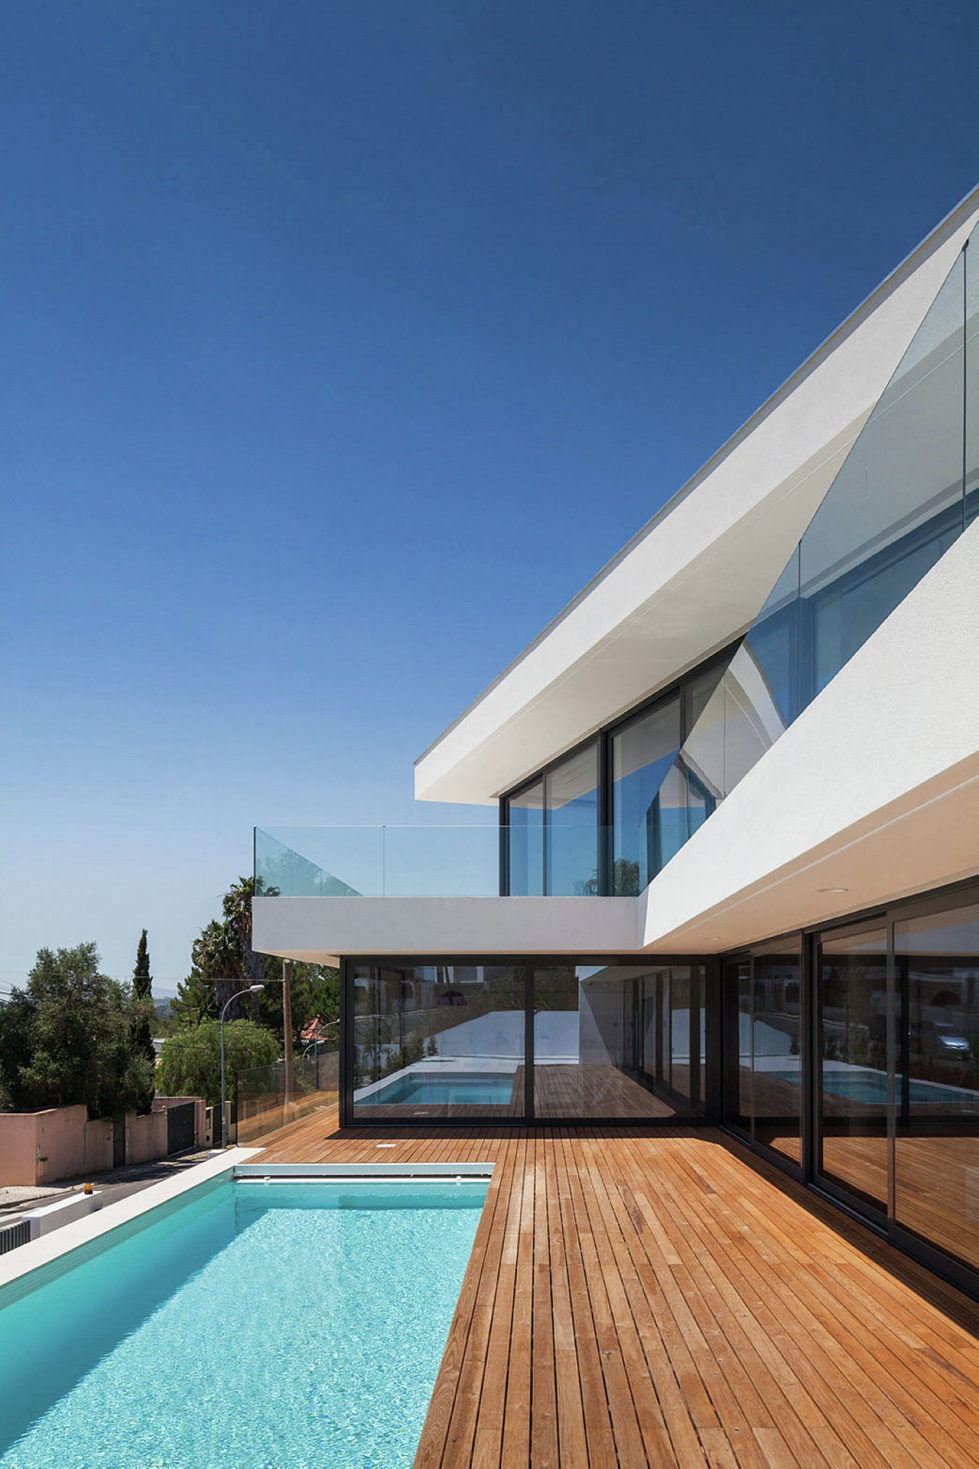 JC House Villa At The Suburb Of Lisbon, Portugal, Upon The Project Of JPS Atelier 4